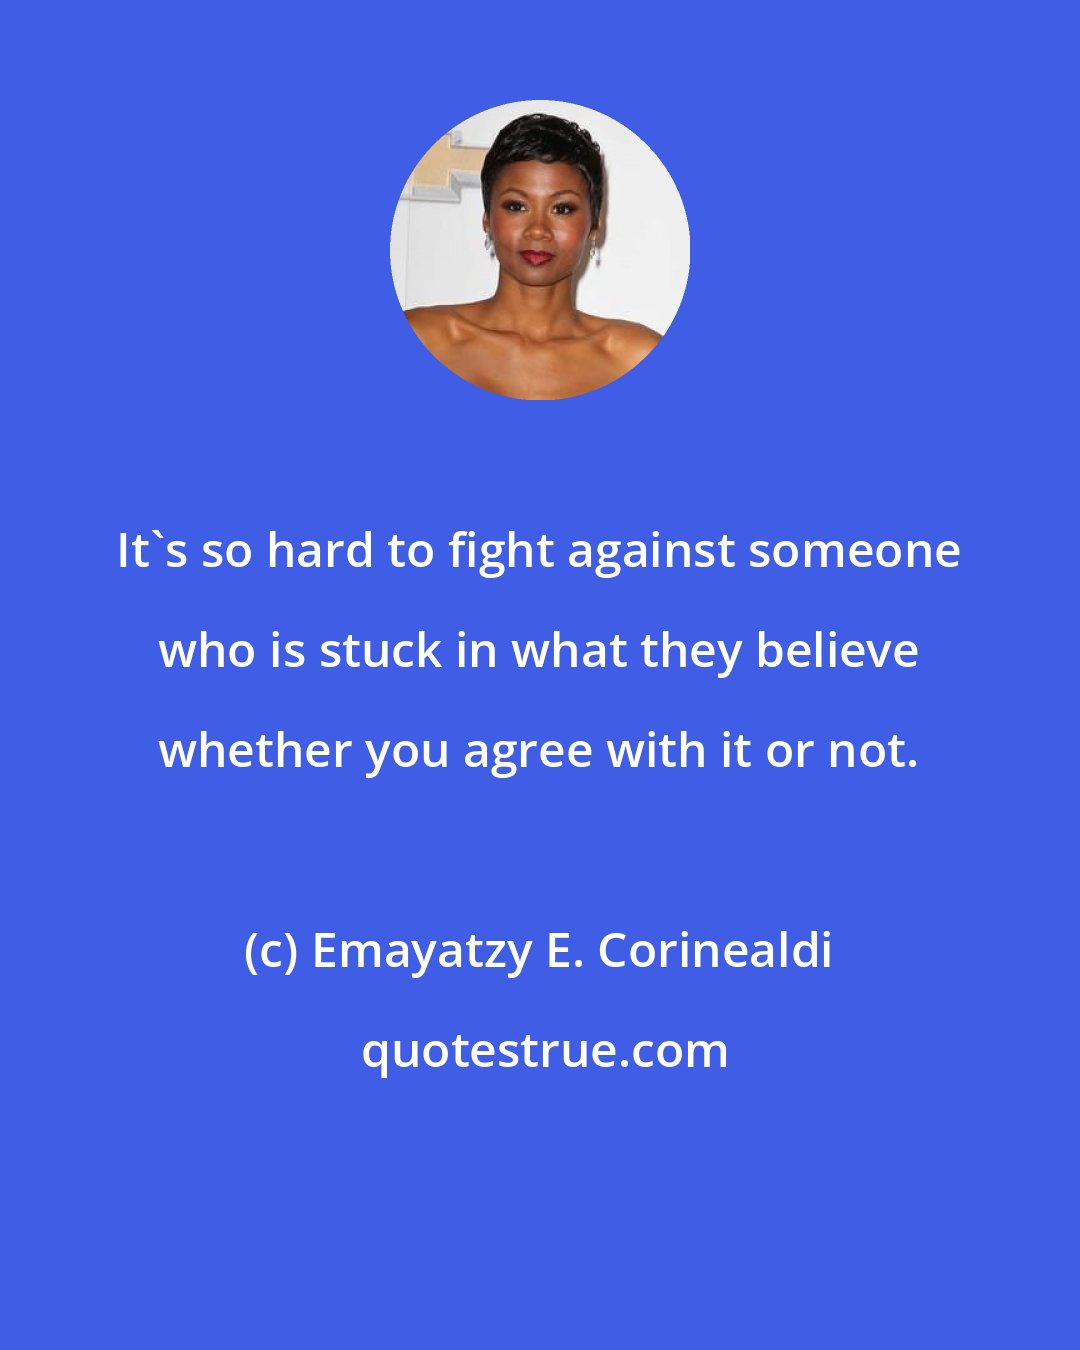 Emayatzy E. Corinealdi: It's so hard to fight against someone who is stuck in what they believe whether you agree with it or not.